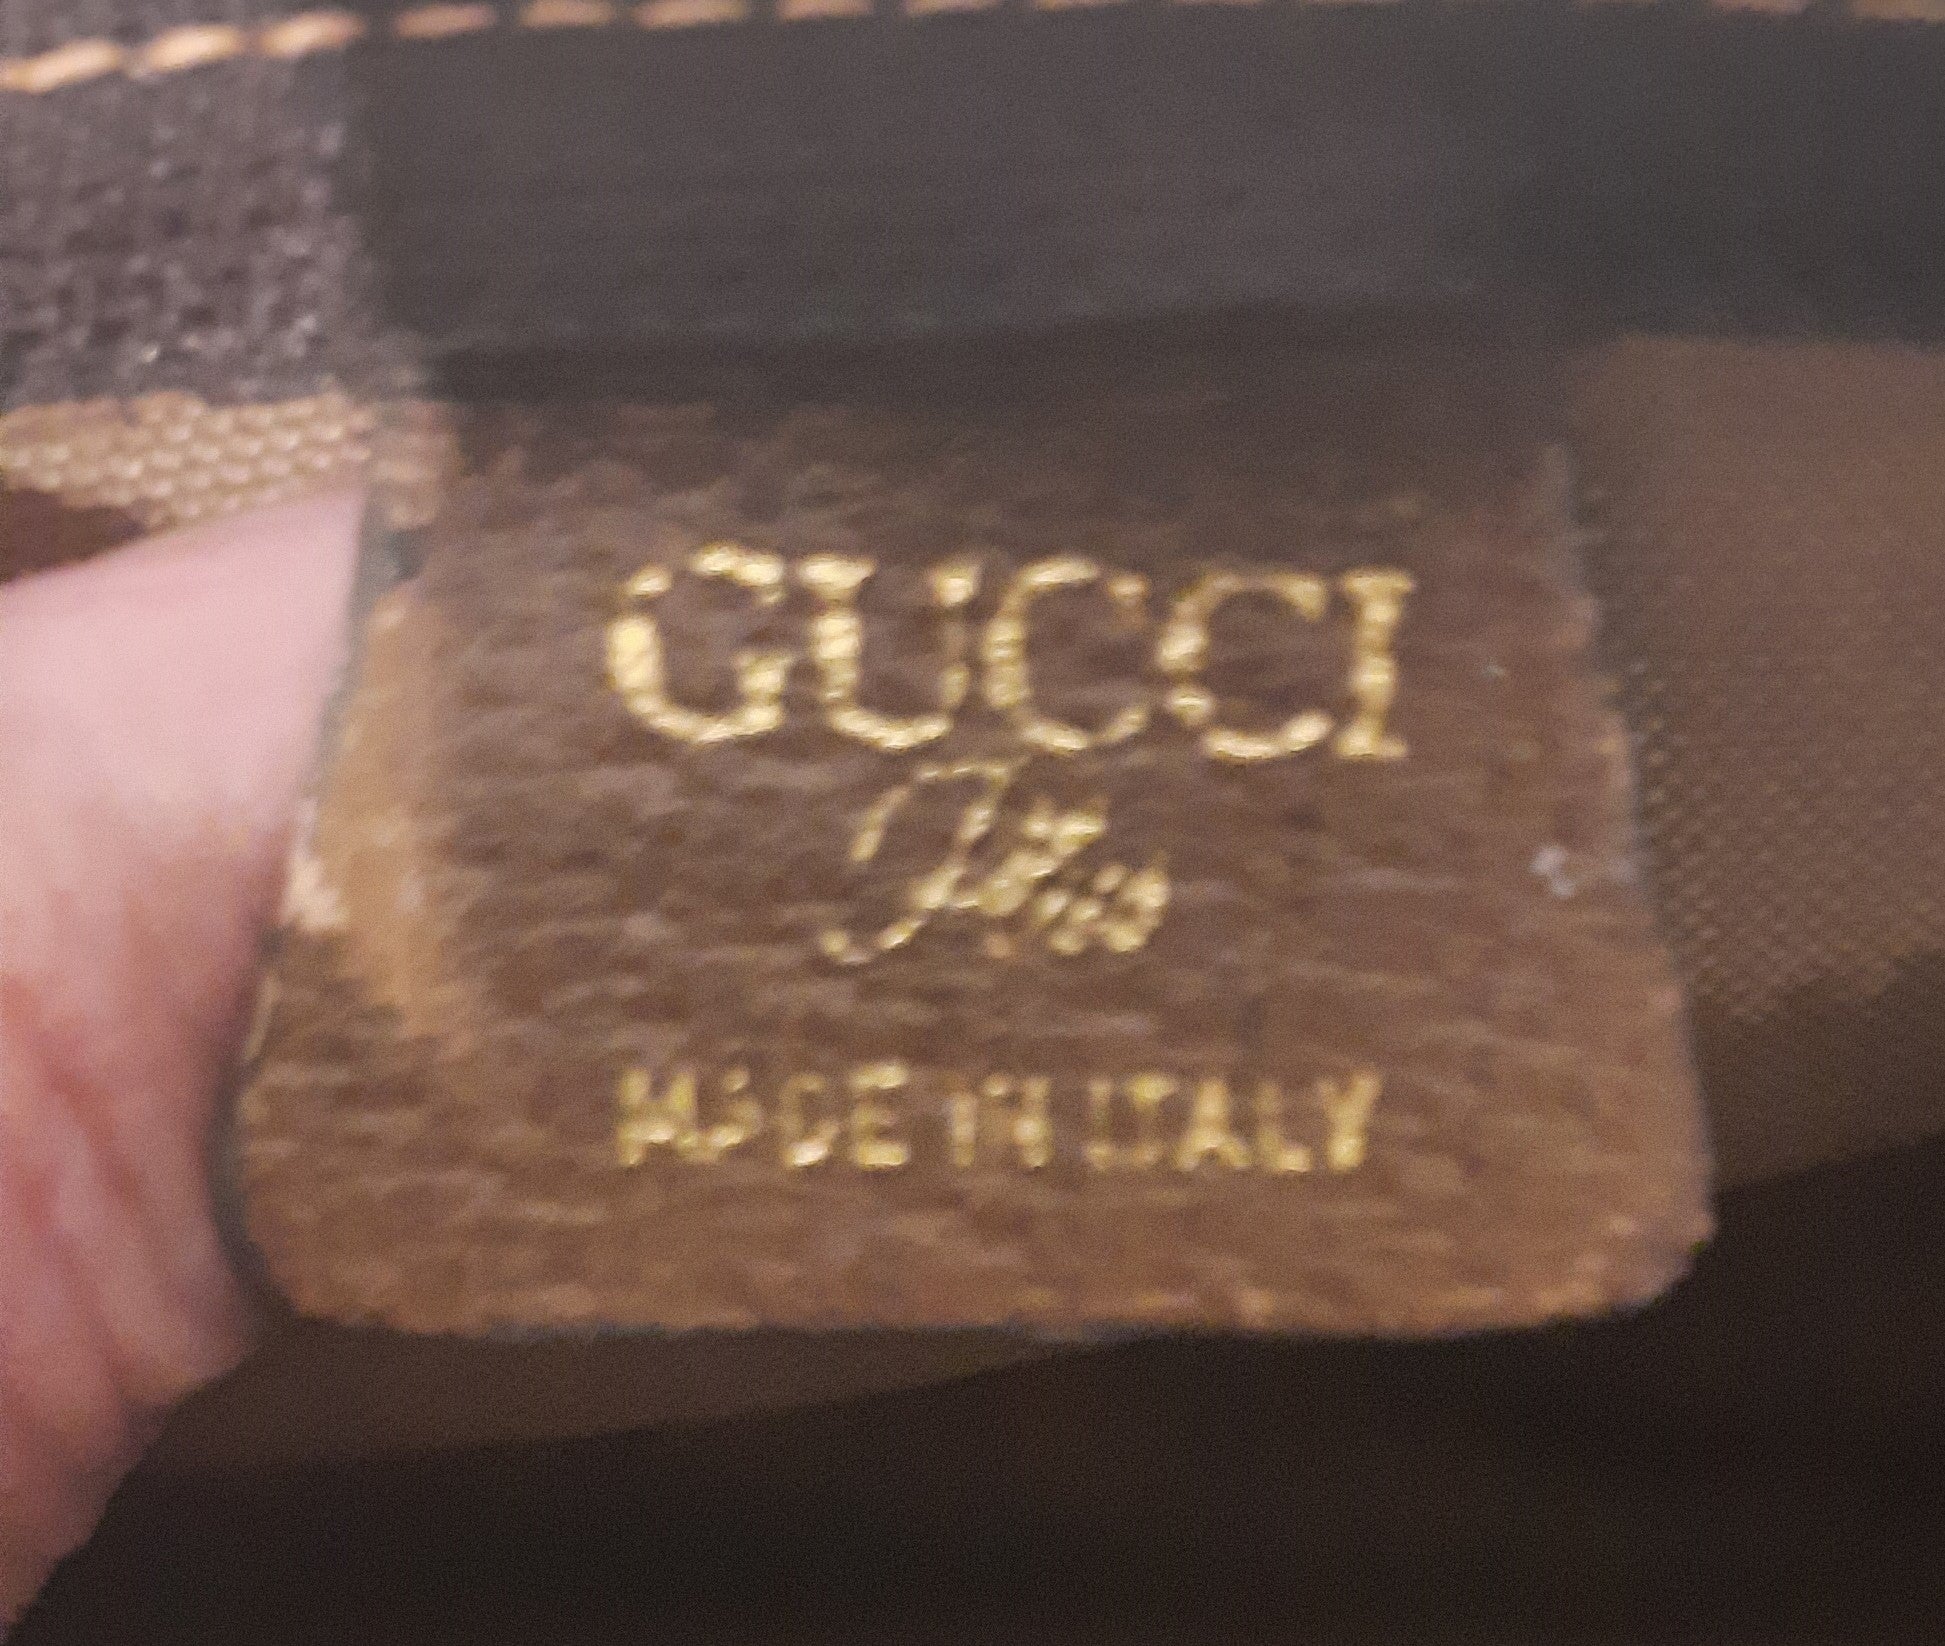 gucci plus made in italy vintage handbag triangular leather tag with heatstamp